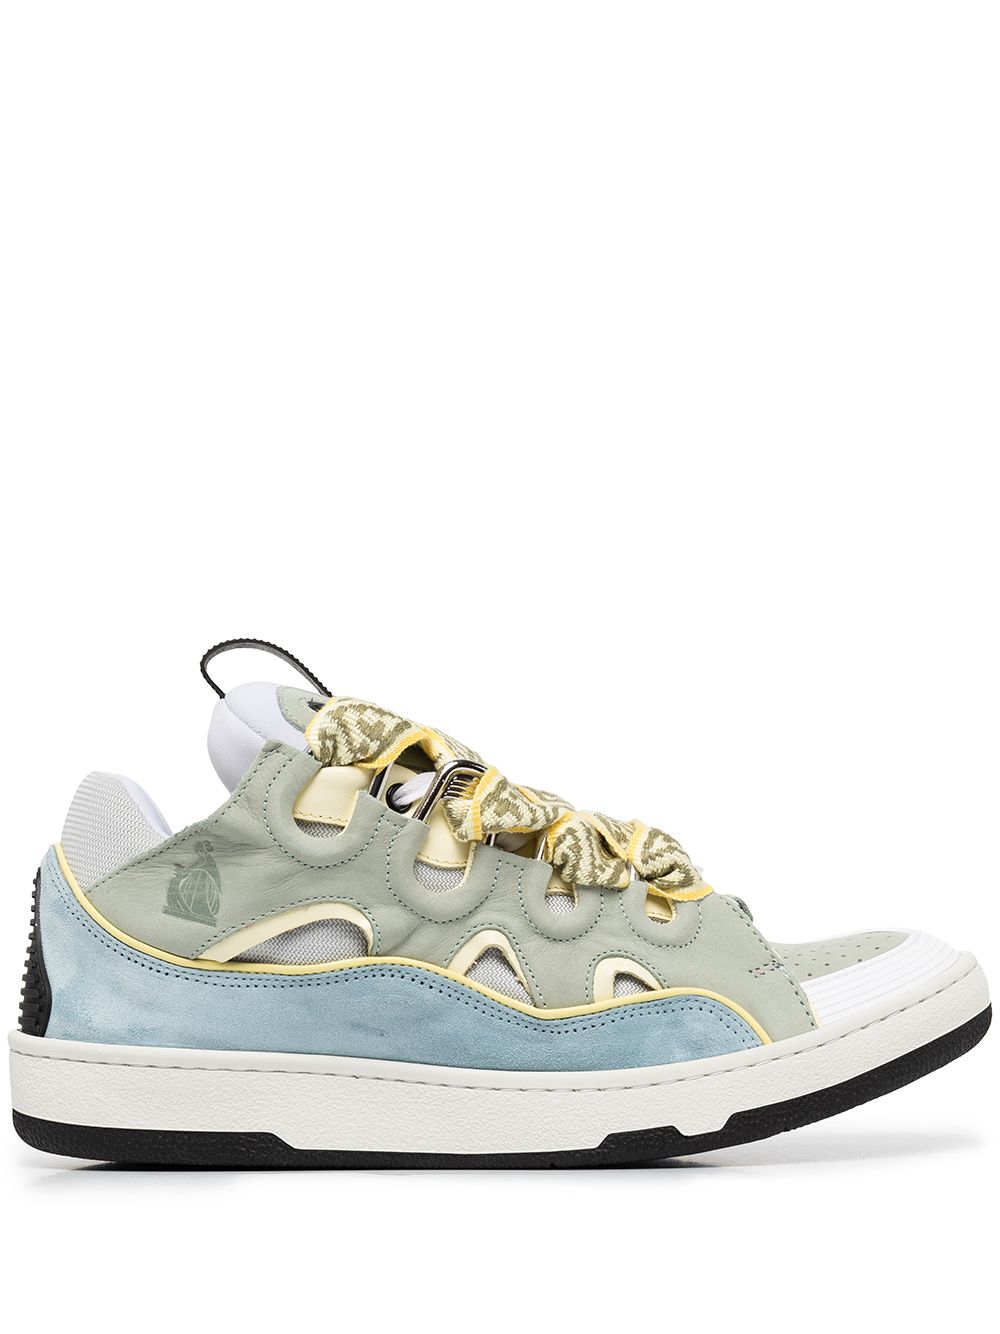 LANVIN Curb Sneakers Ice Blue/Pale Green